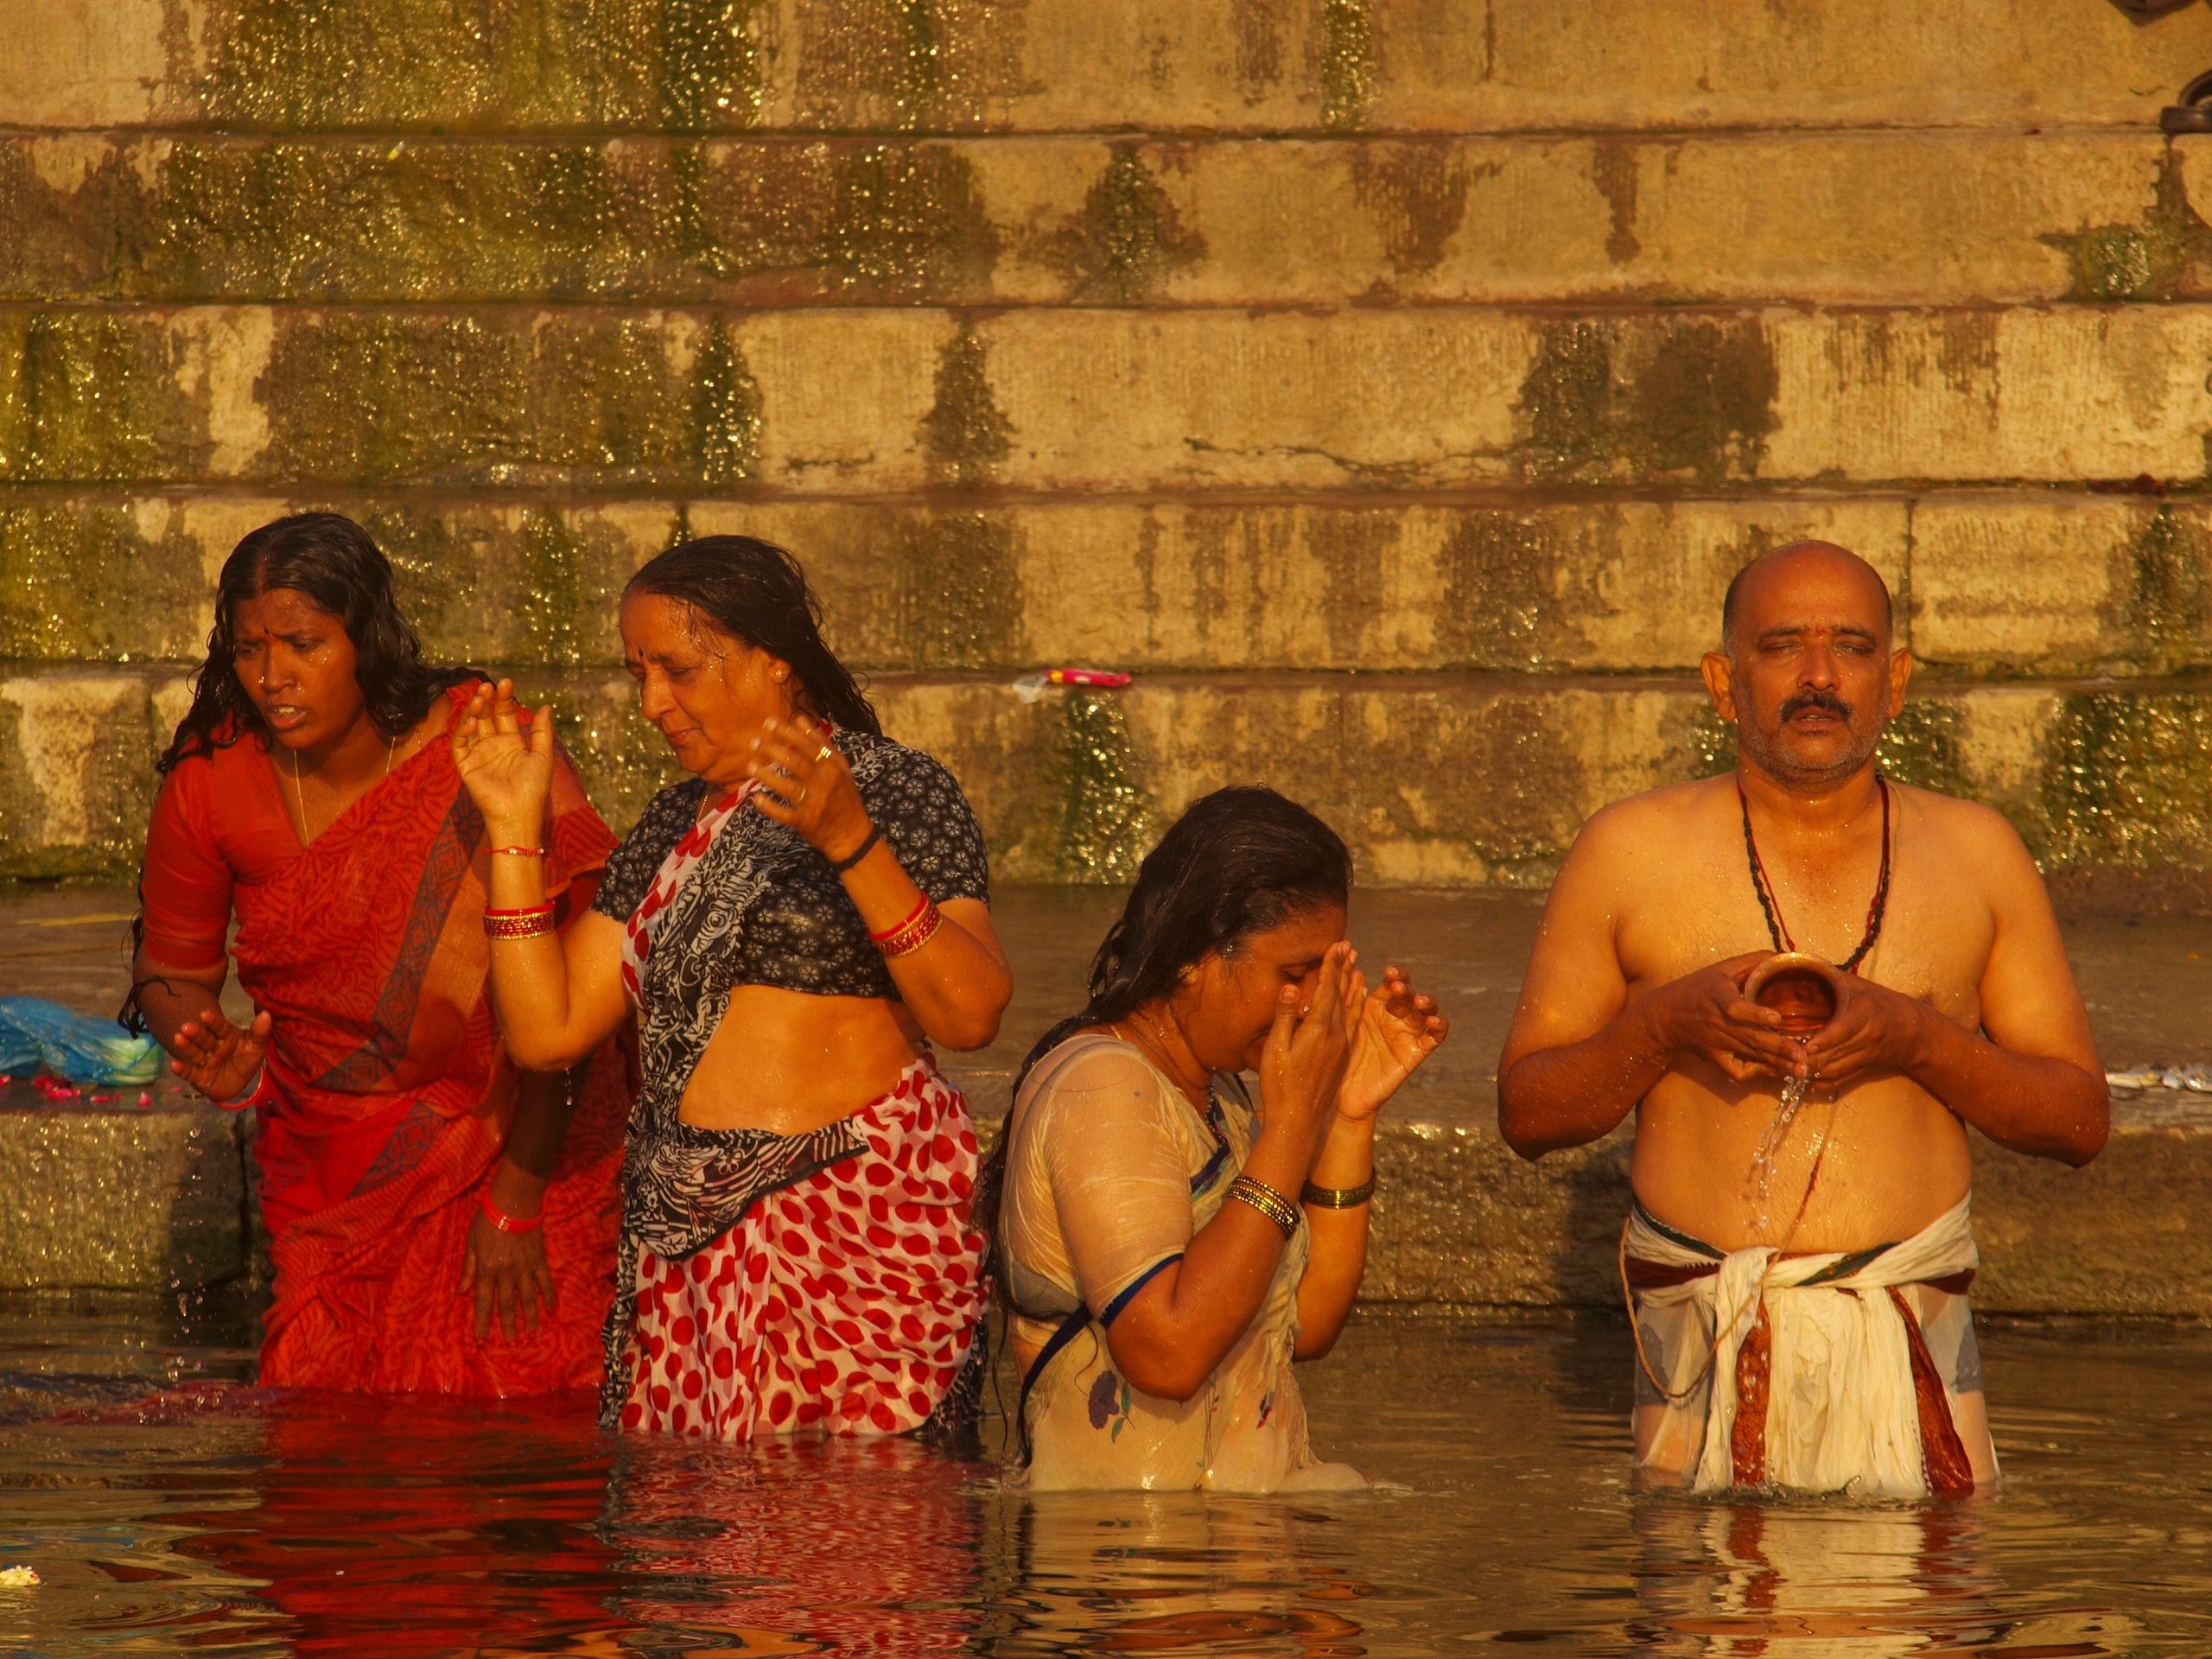 Pilgrims take a “holy dip” in the sacred river. Image by George Black. India, 2015.